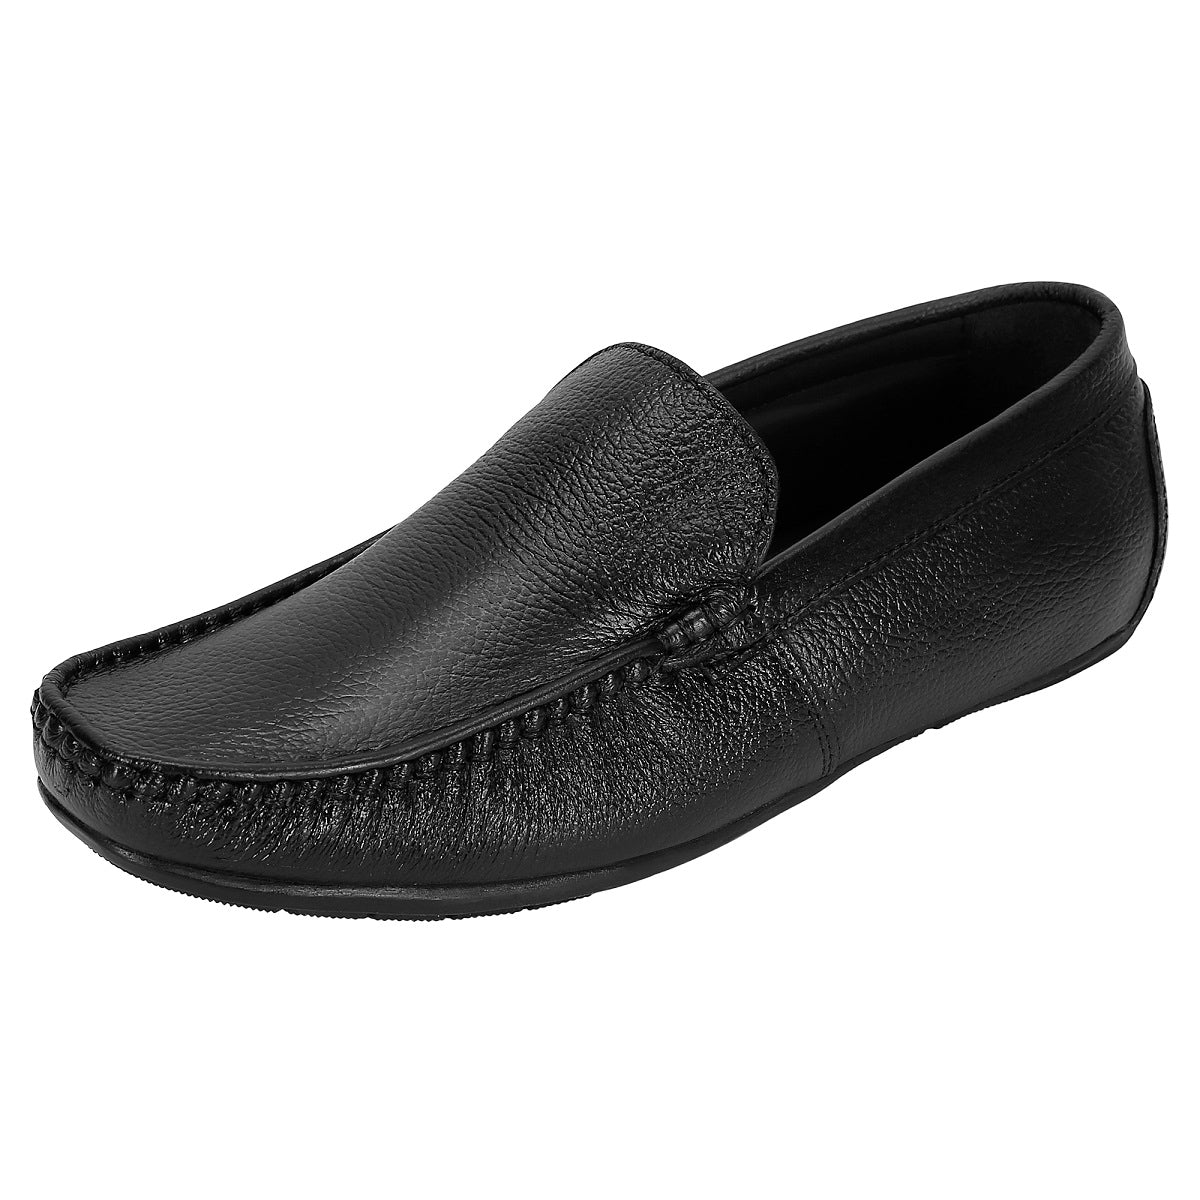 Leather Loafers for Men - Used